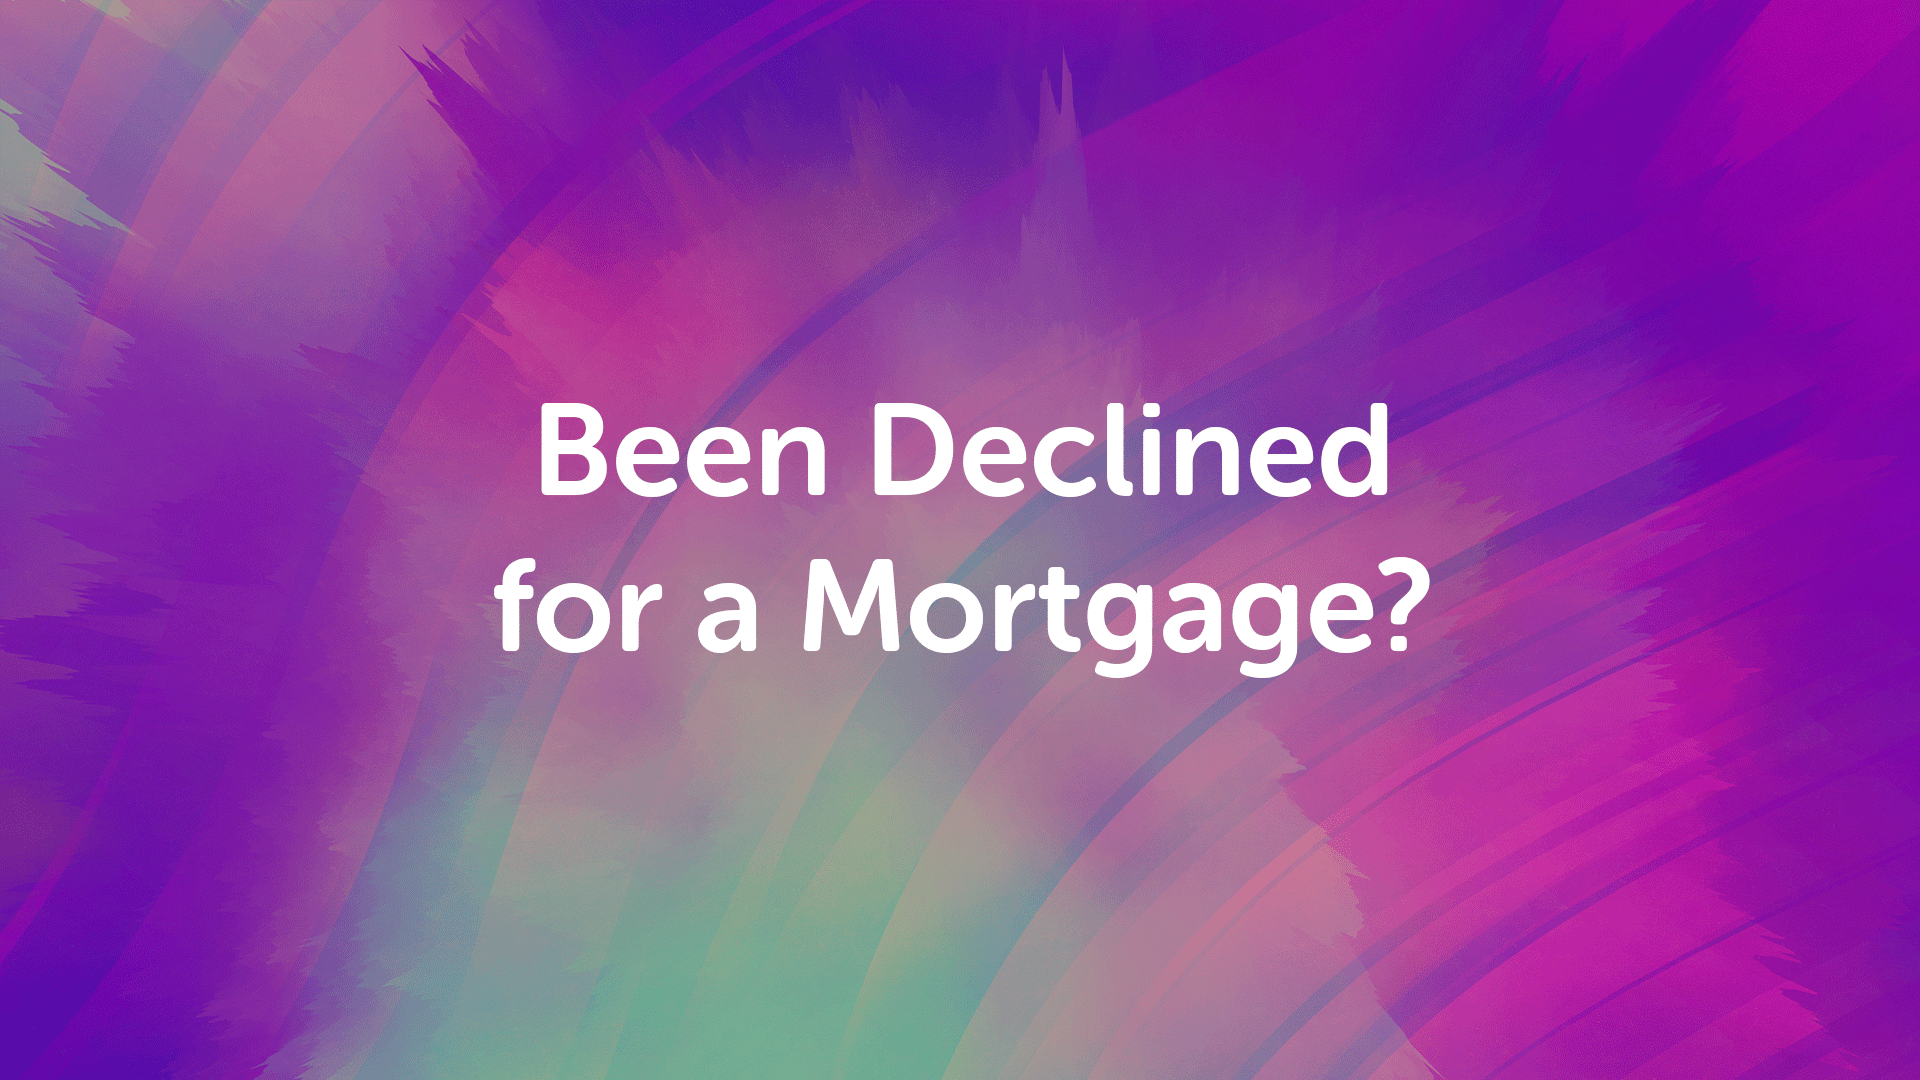 What Can I do if I Have Been Declined for a Mortgage in Bristol?